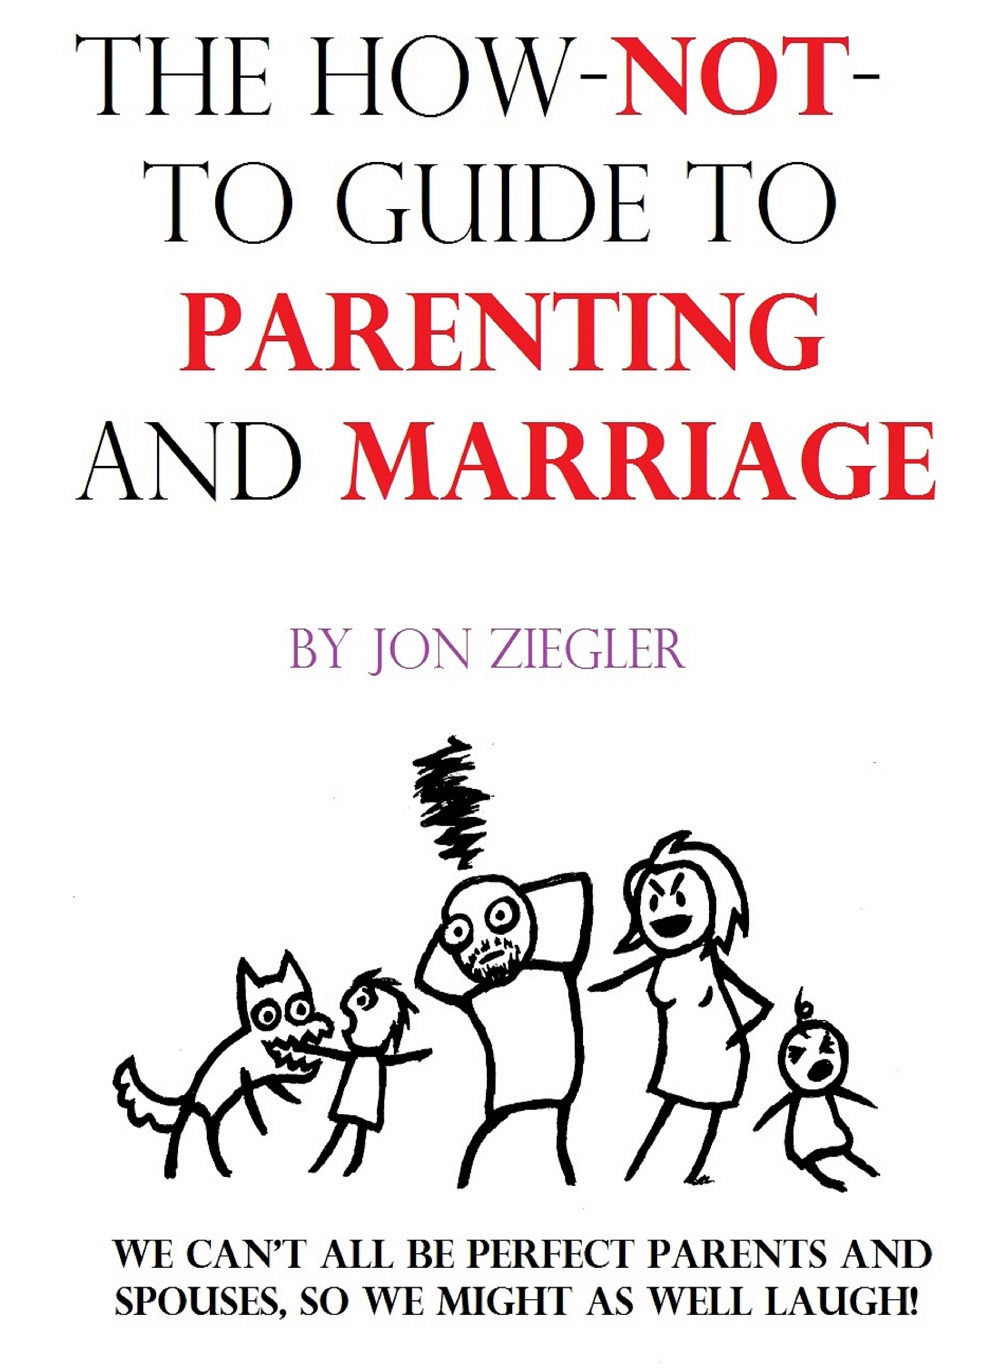 FREE: The How-Not-To Guide to Parenting and Marriage by Jonathan Ziegler